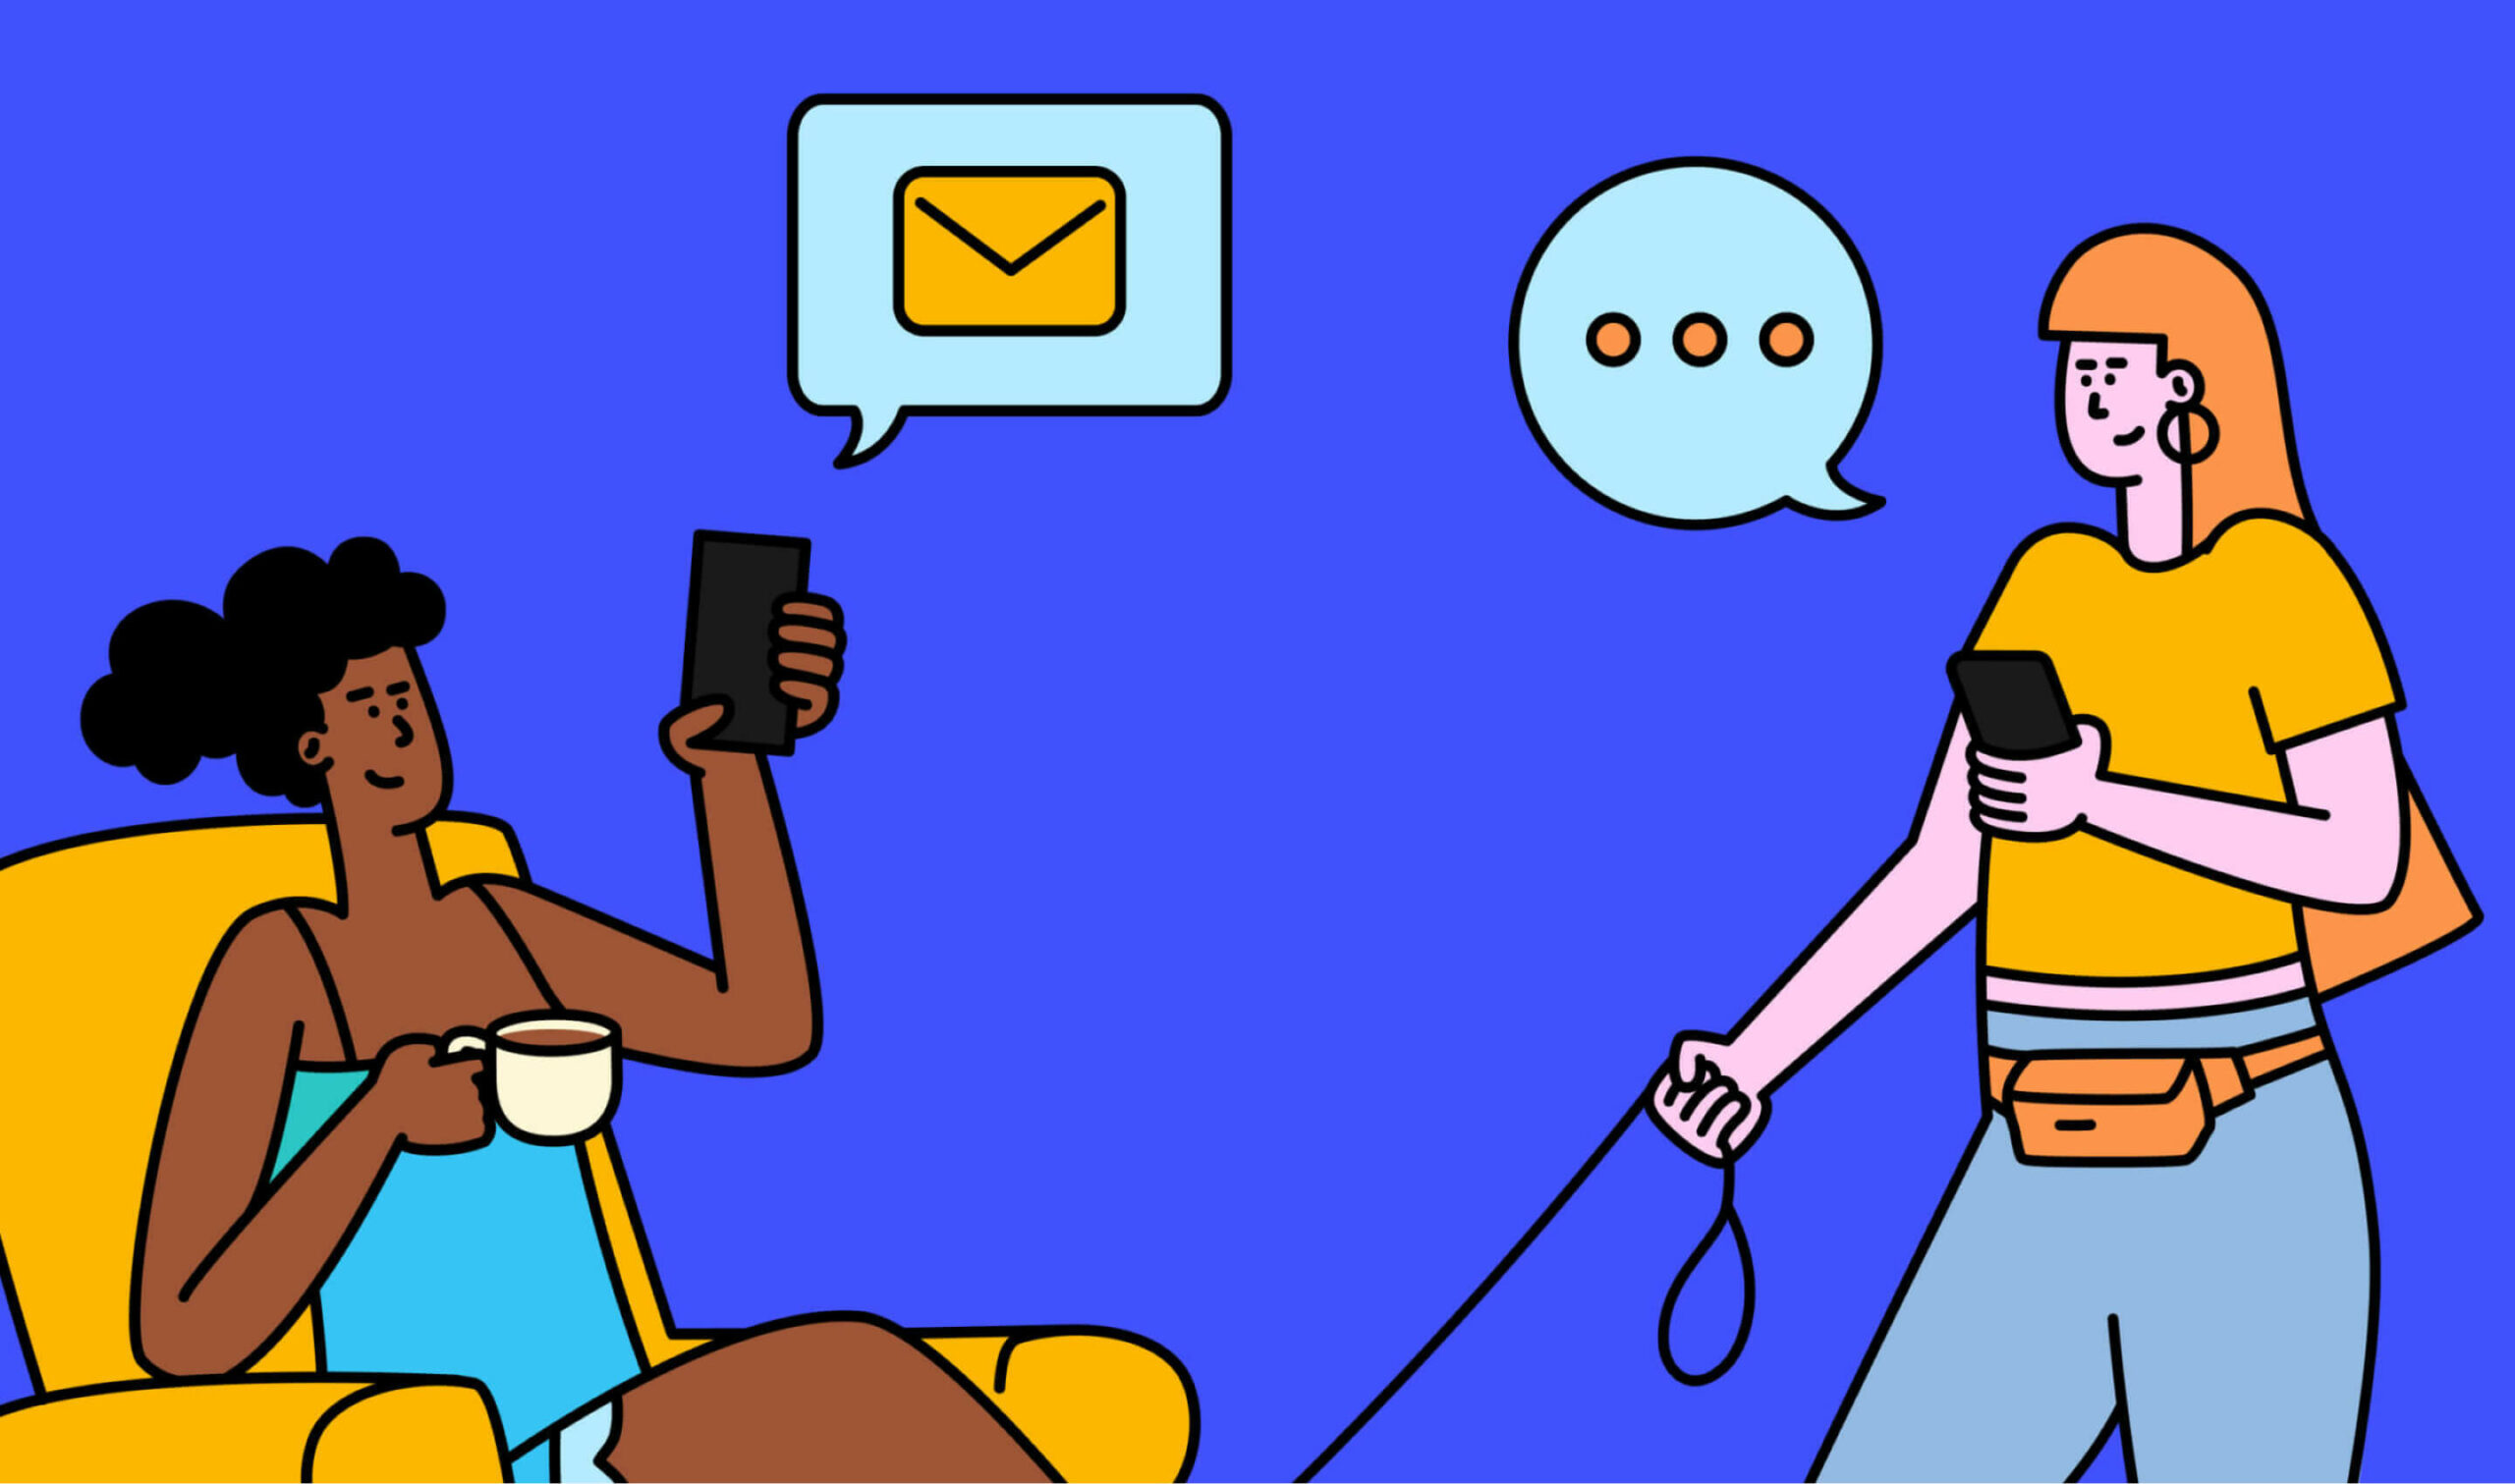 Mobile-first: Illustration of two characters, both on their phones messaging